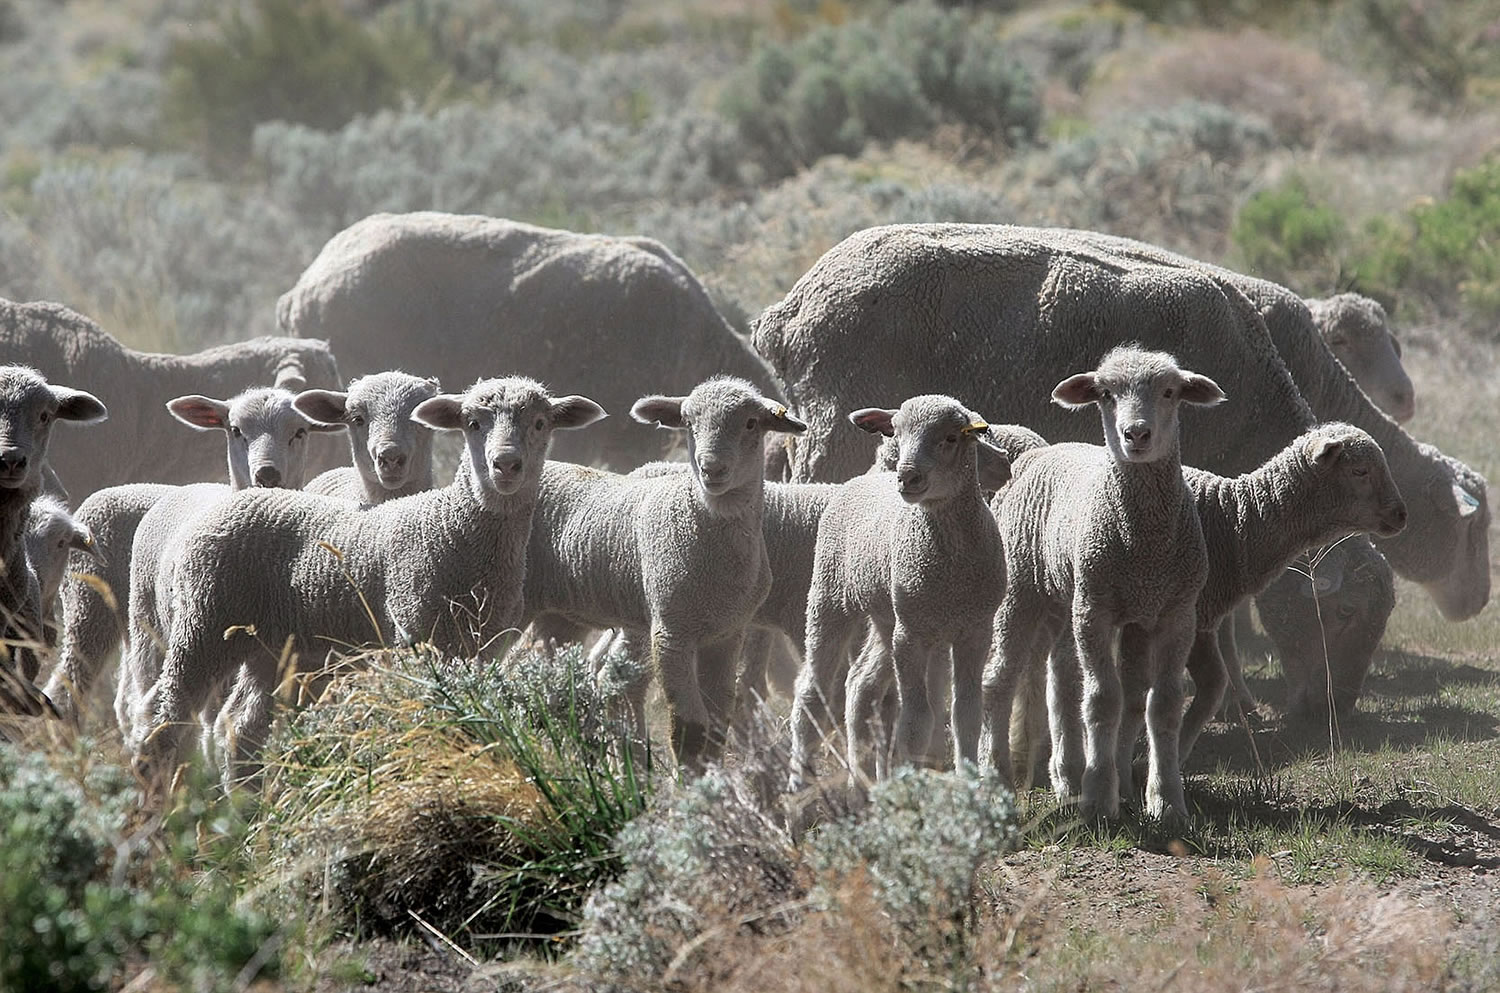 Sheep are deployed in April on the western hills of Carson City, Nev. to munch emerging cheatgrass and other vegetation to reduce the risk of catastrophic summer wildfires.